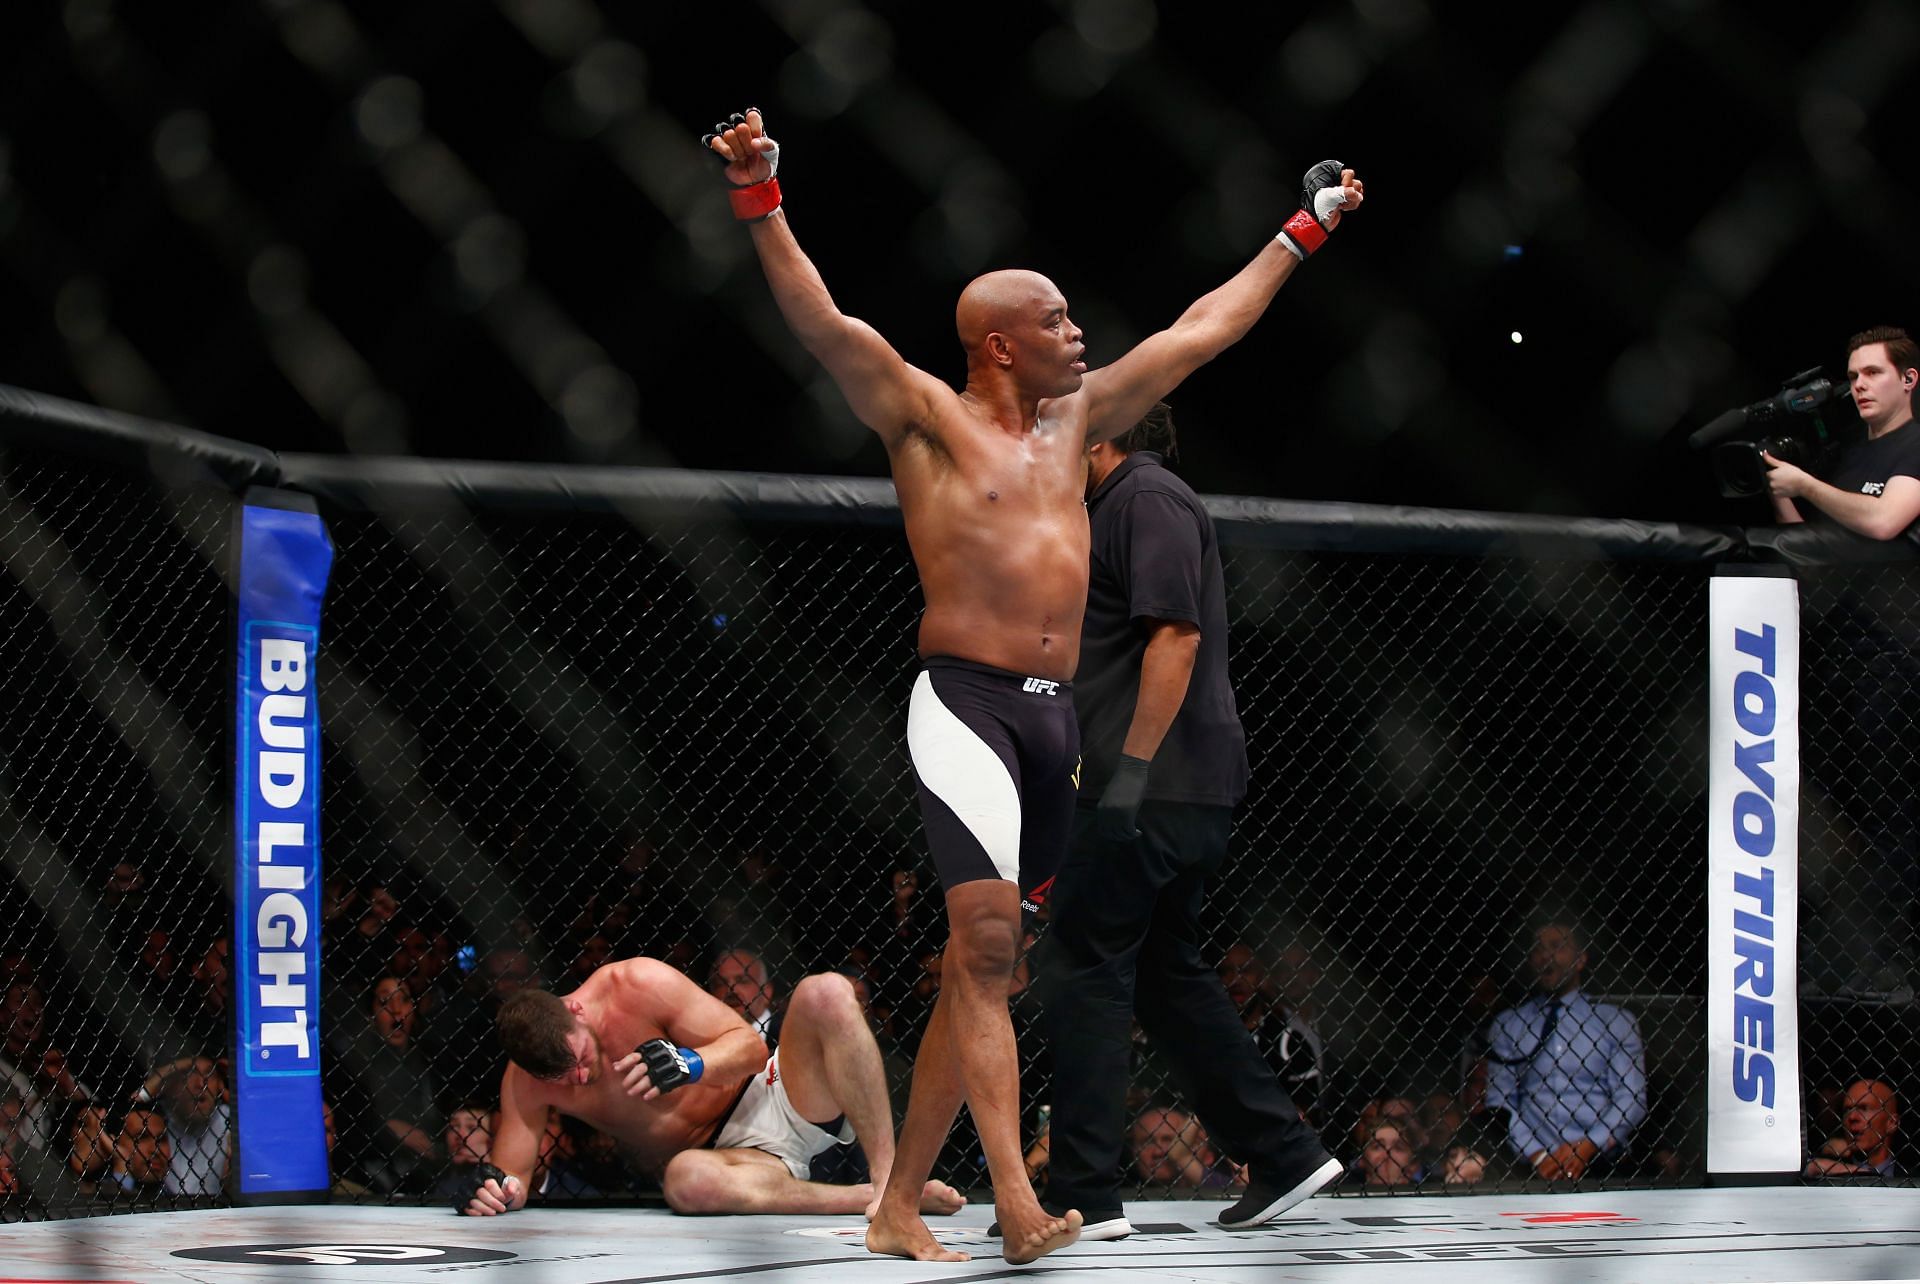 Anderson Silva claimed middleweight gold by stopping Rich Franklin in violent fashion